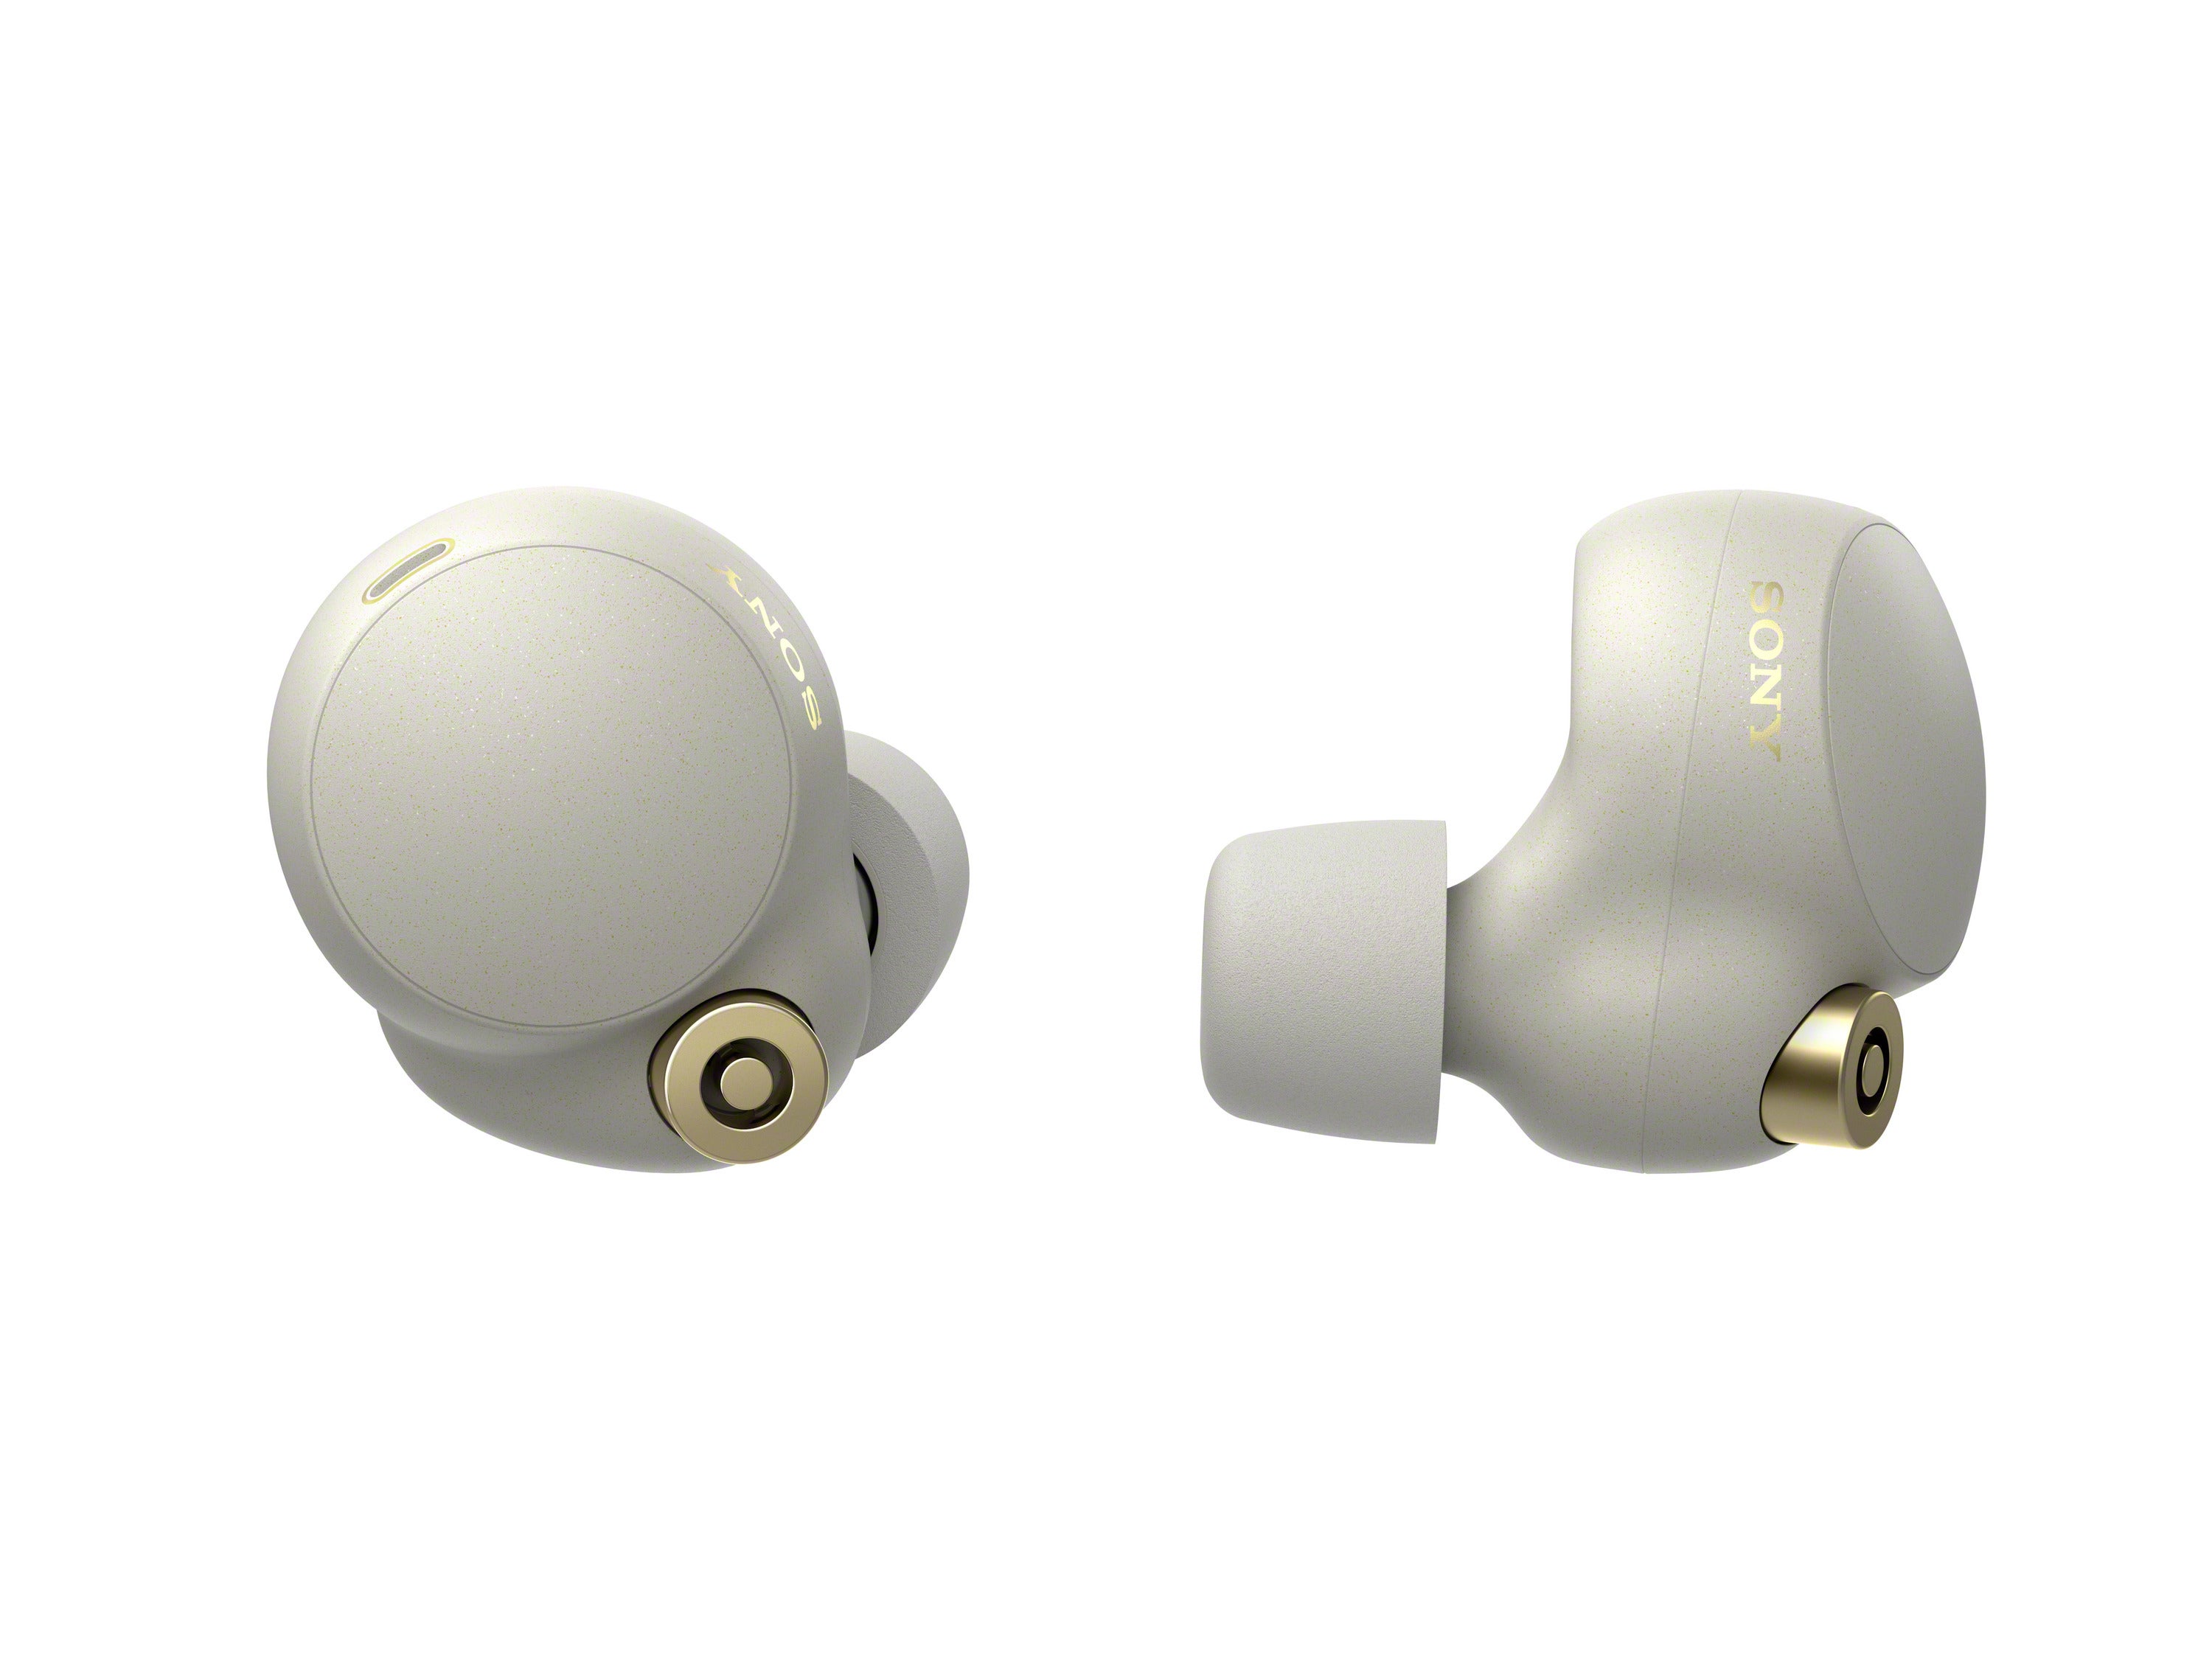 Sony WF-1000XM4 wireless earbuds are official, Sony's most 